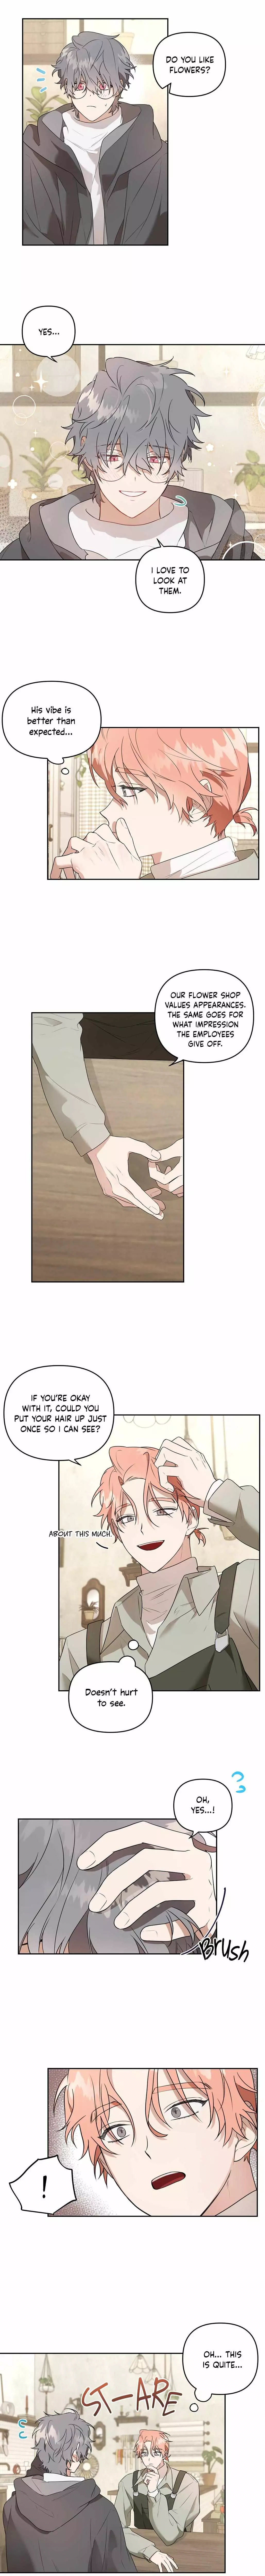 Jungwon’S Flowers - 1 page 13-2f7da227